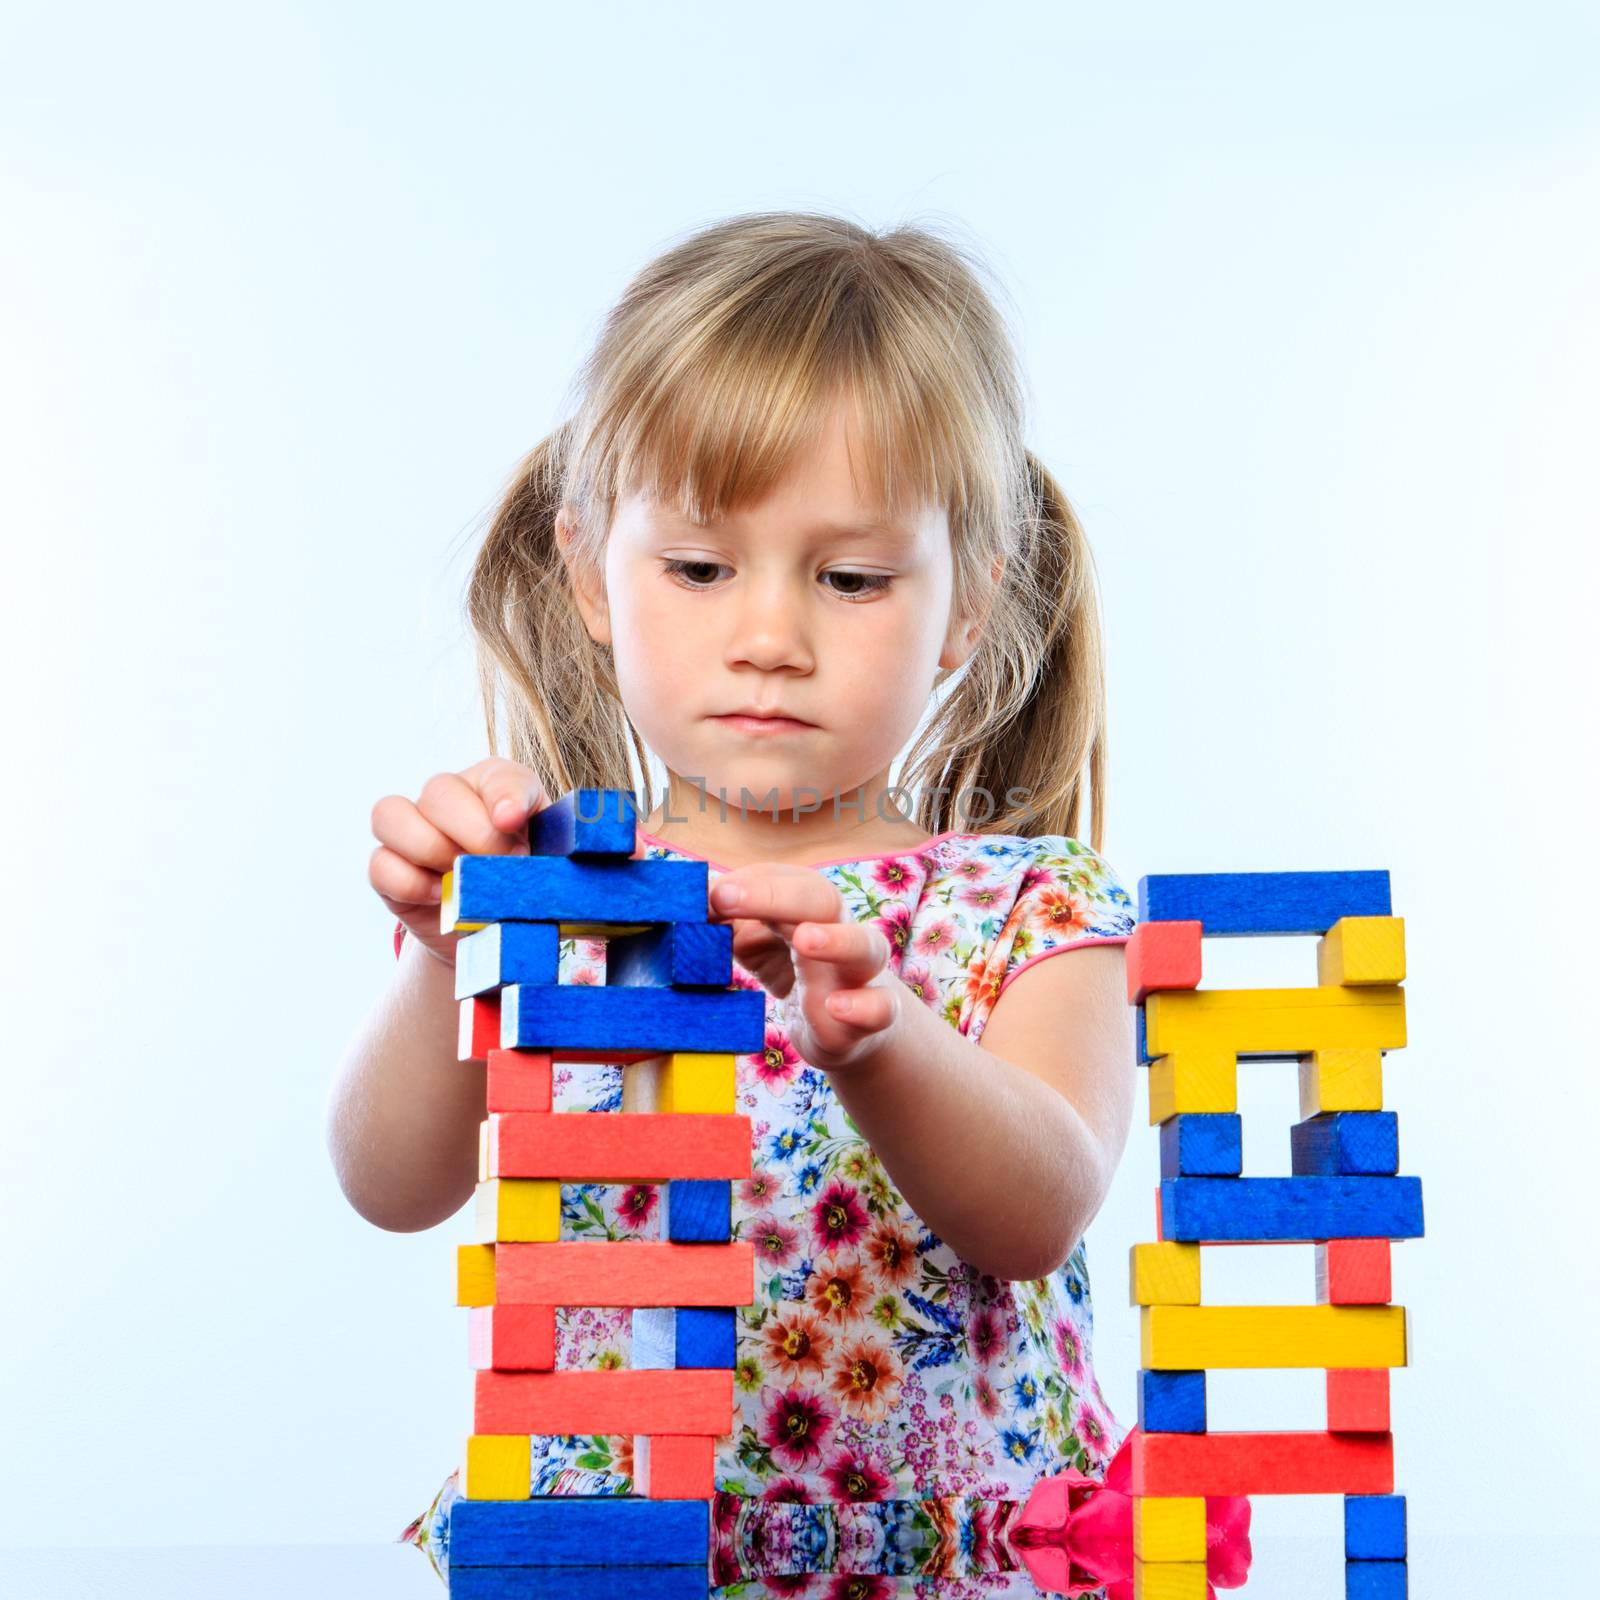 Little girl building structure with wooden blocks. by karelnoppe